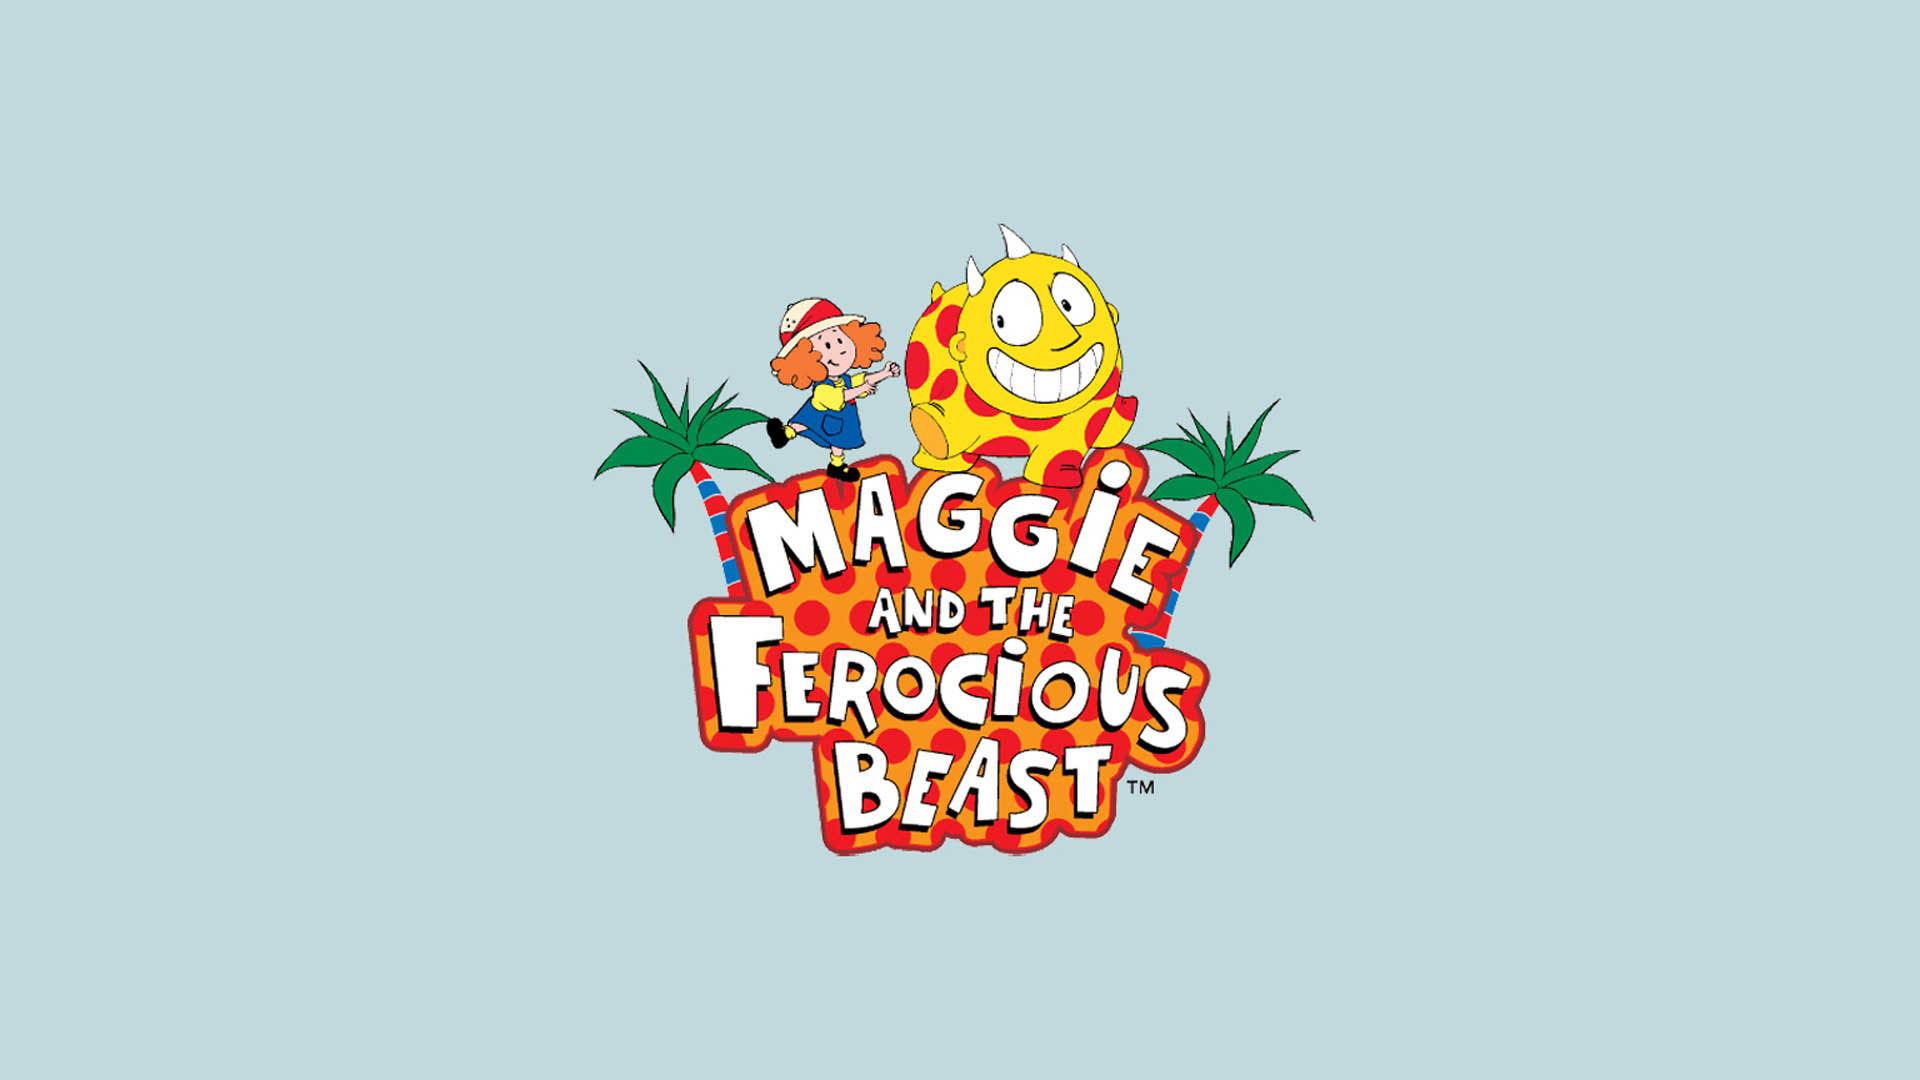 Show Maggie and the Ferocious Beast